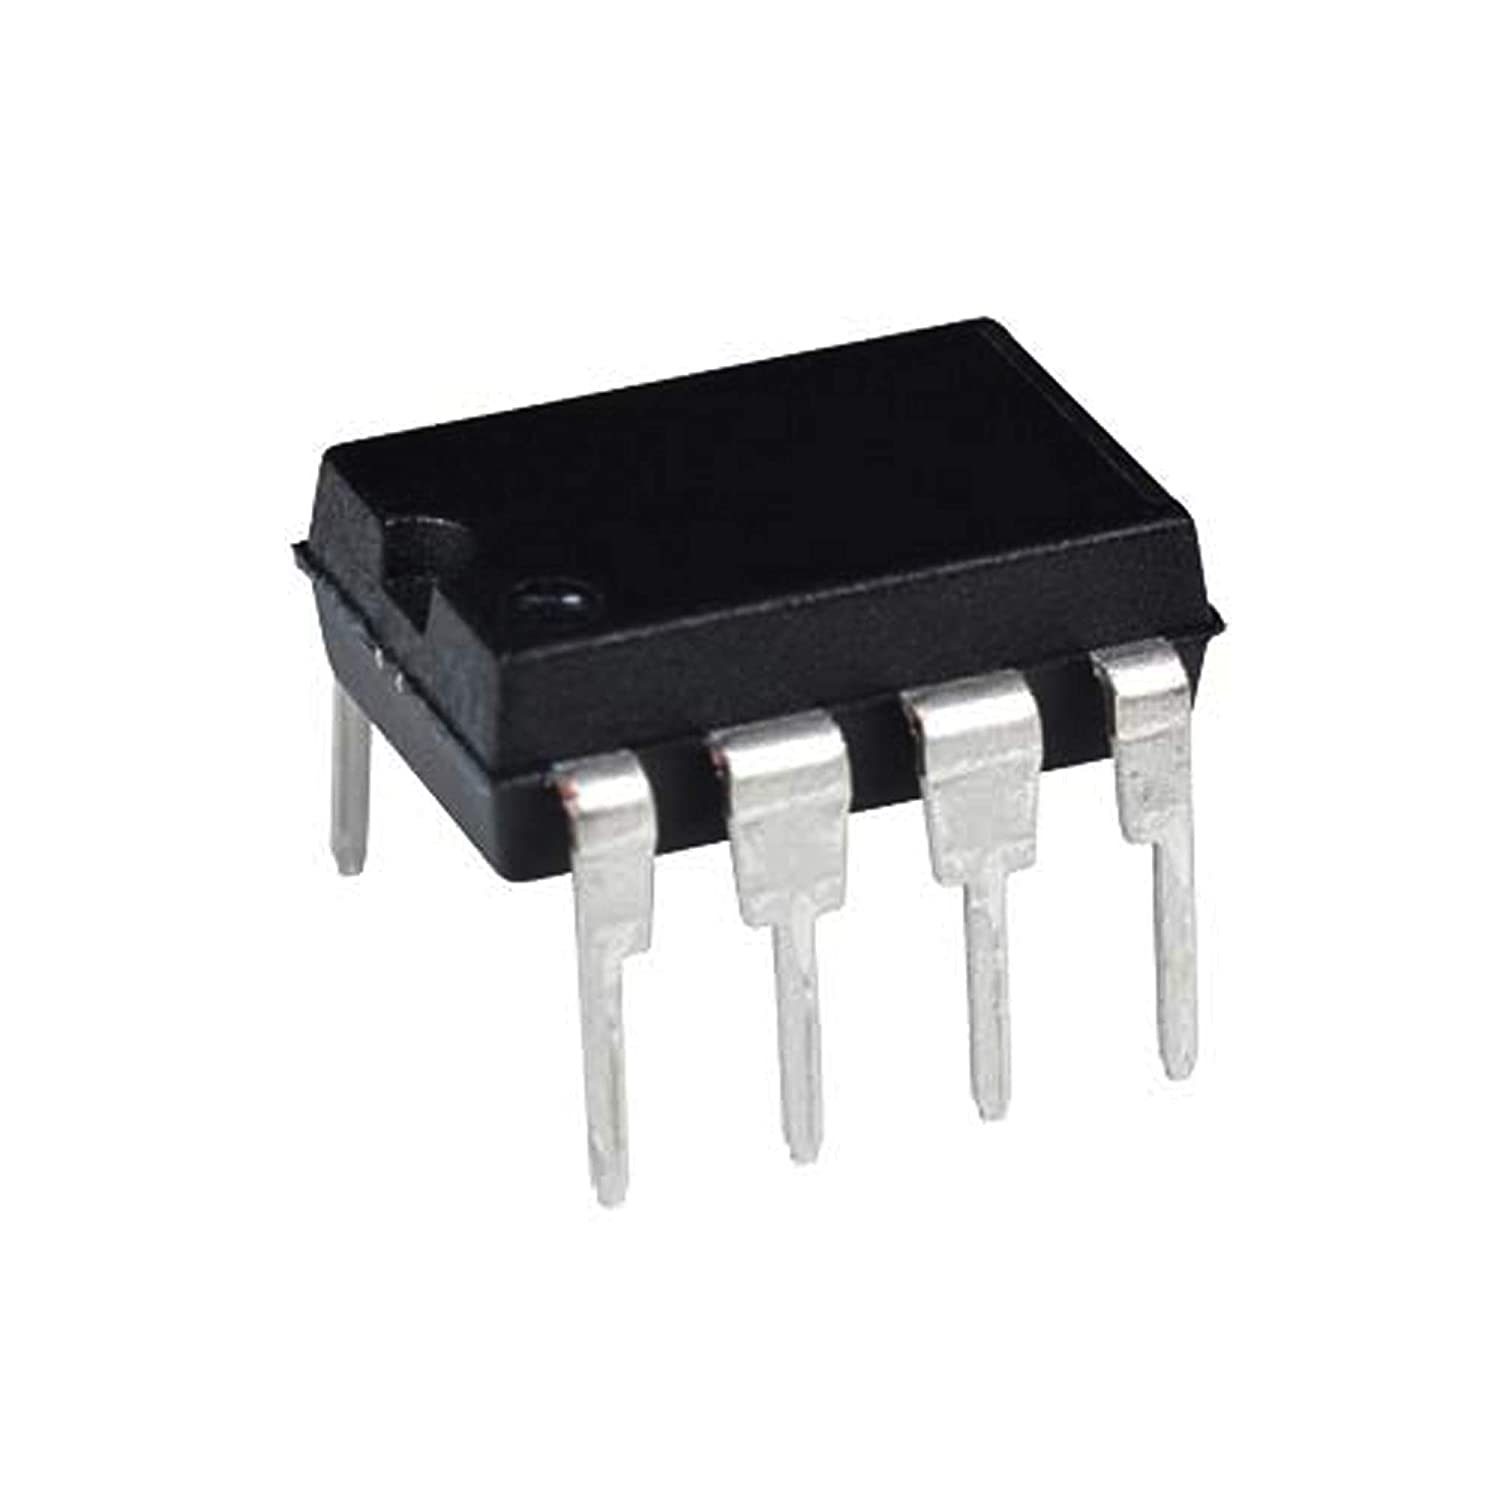 LM358 DUAL OPERATIONAL AMPLIFIER DIP-8